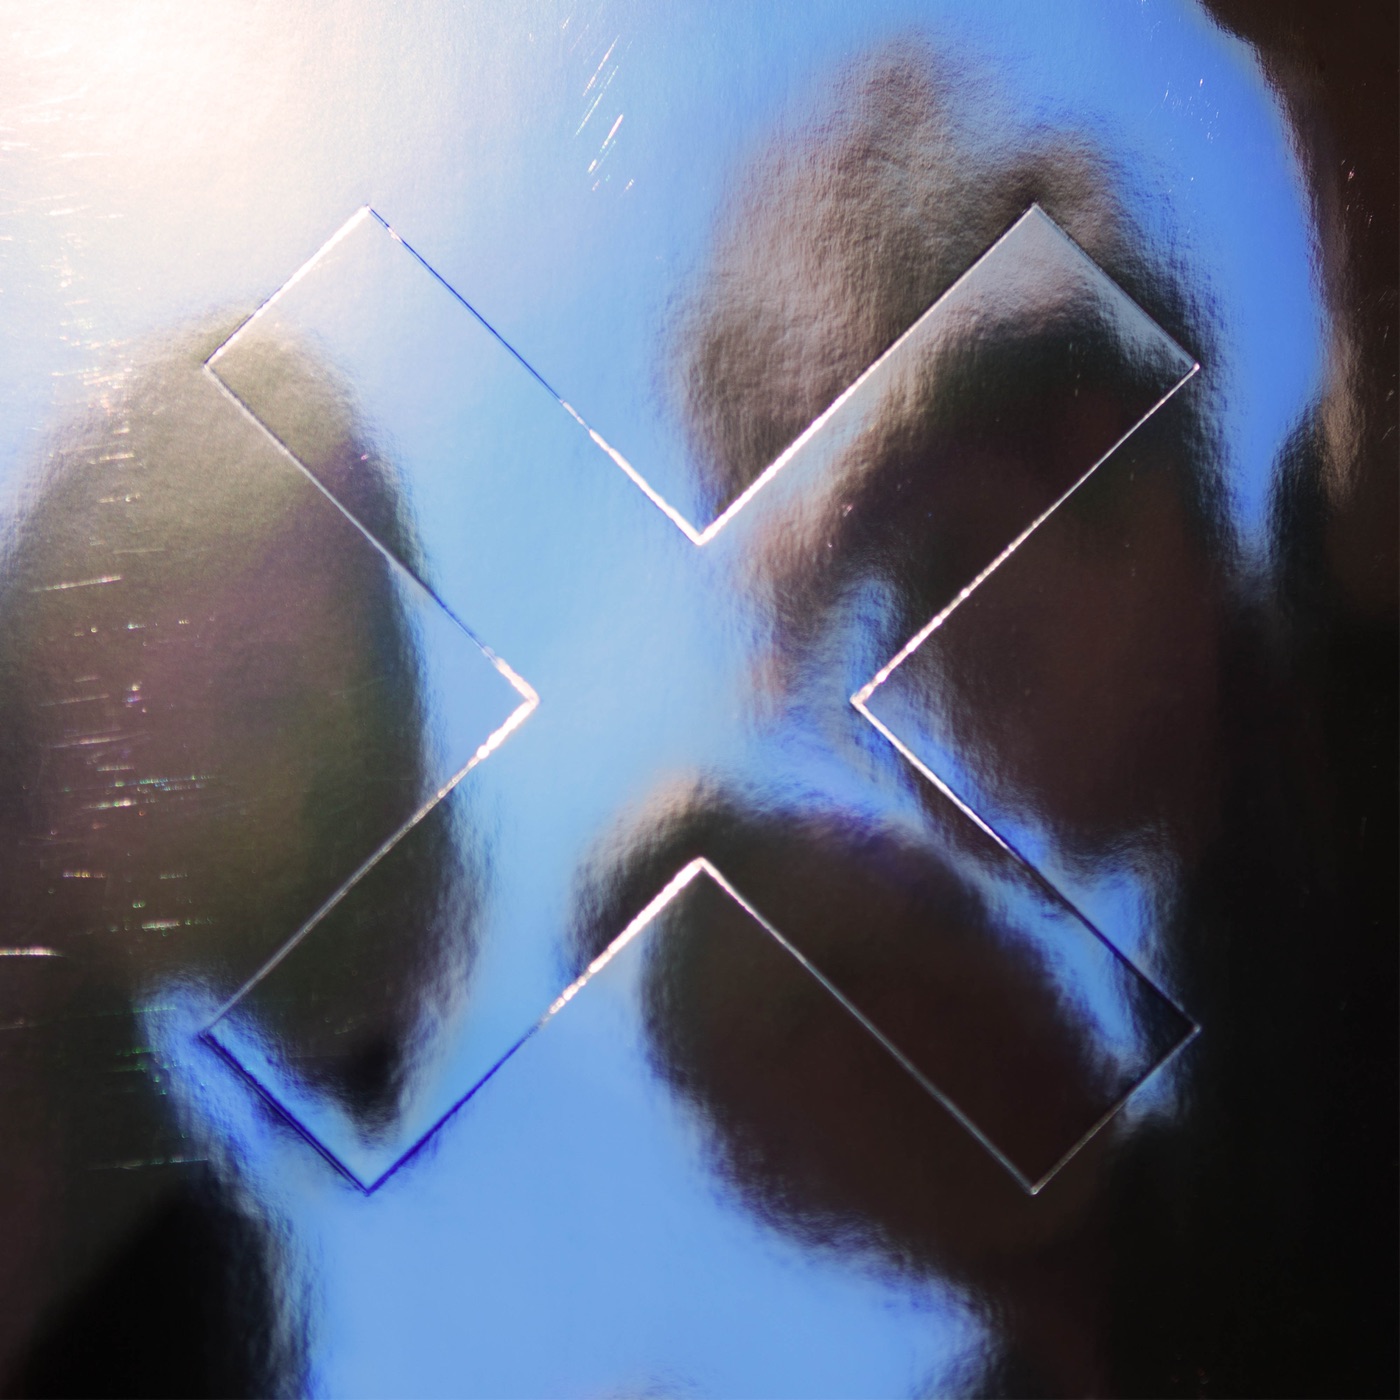 On Hold by The xx